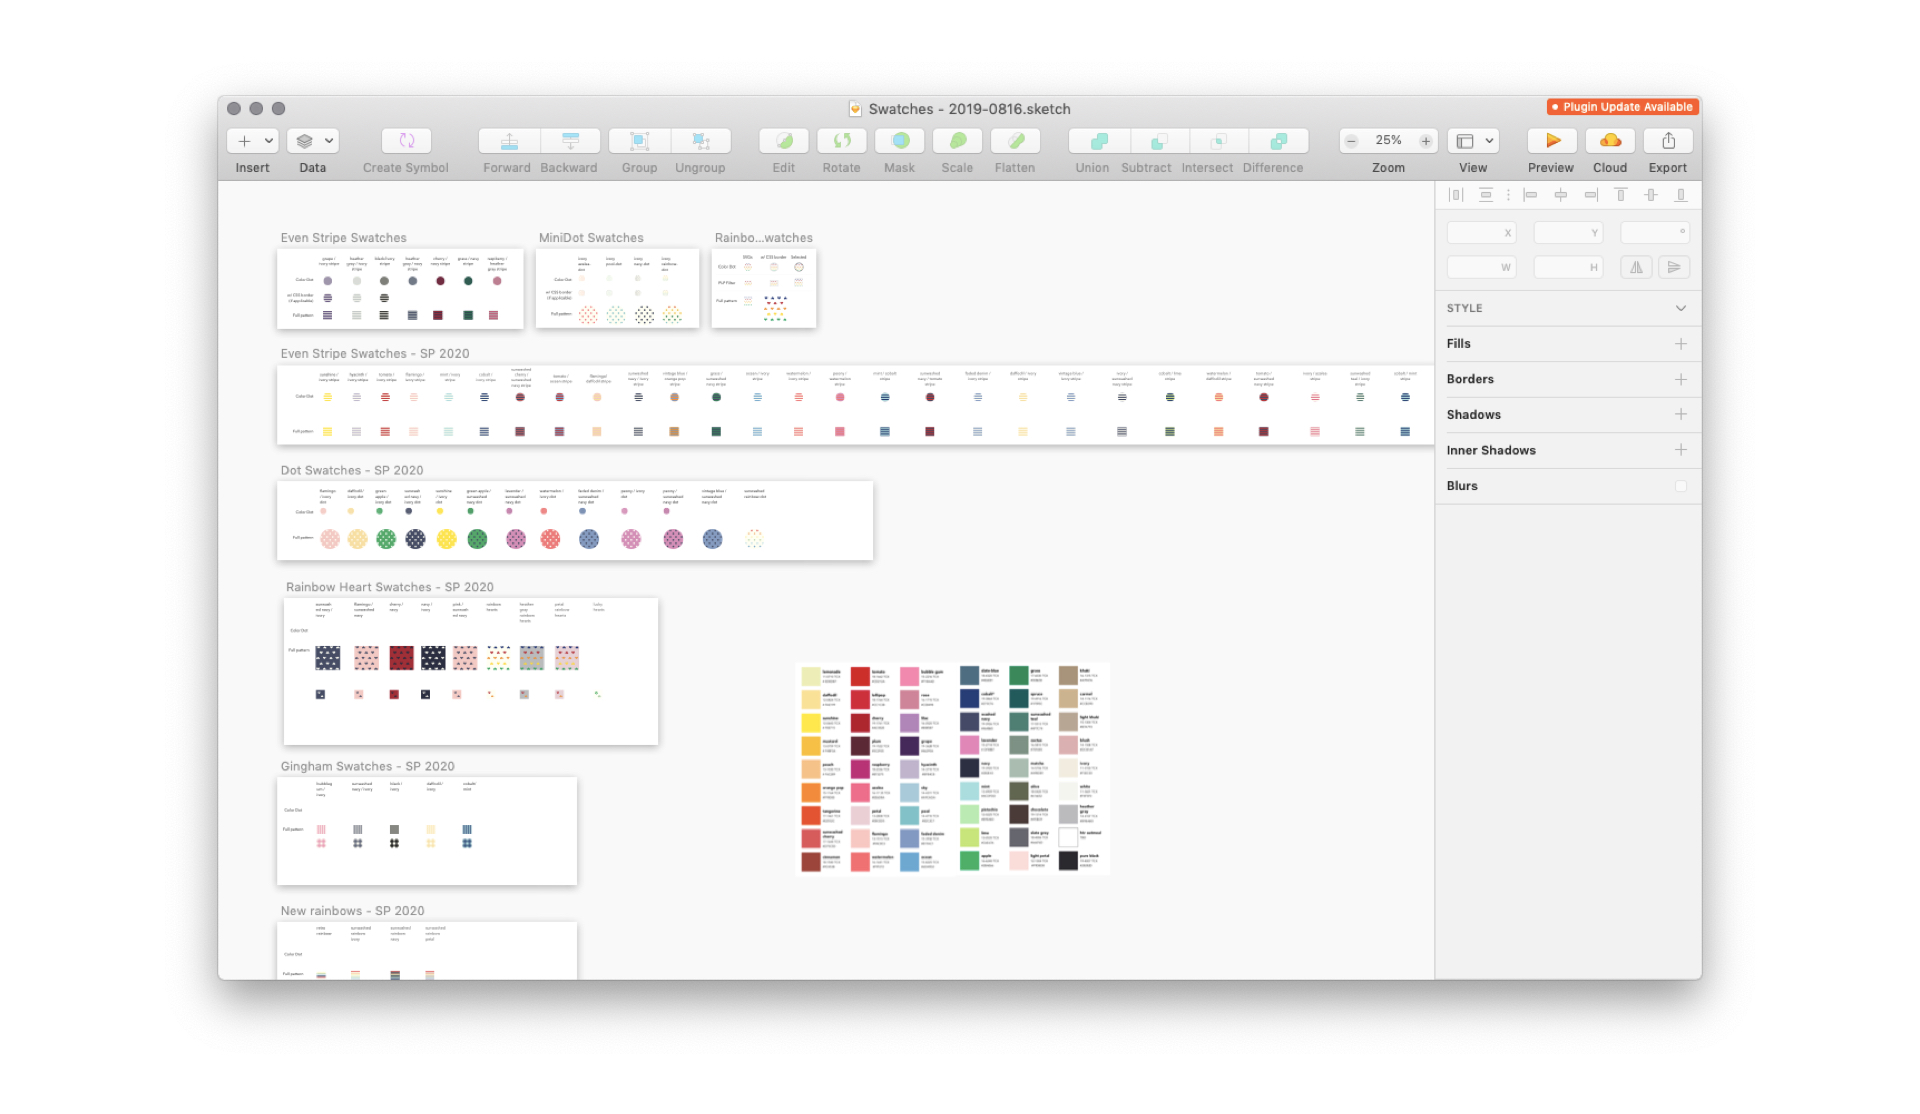 Screenshot of a Sketch file showing dozens of swatches.